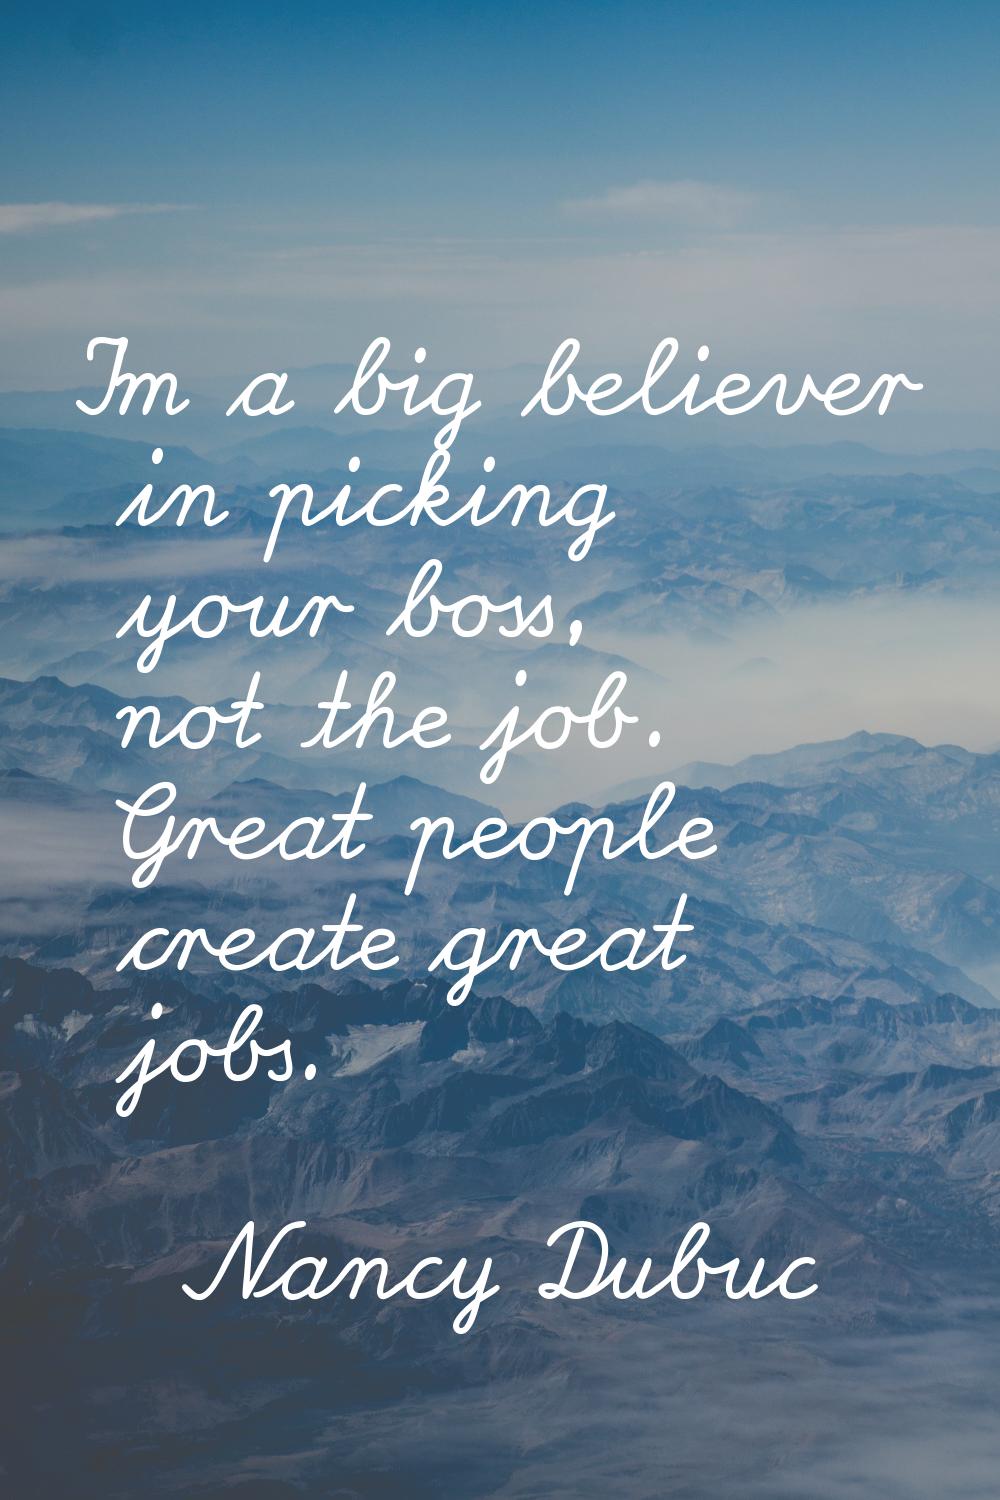 I'm a big believer in picking your boss, not the job. Great people create great jobs.